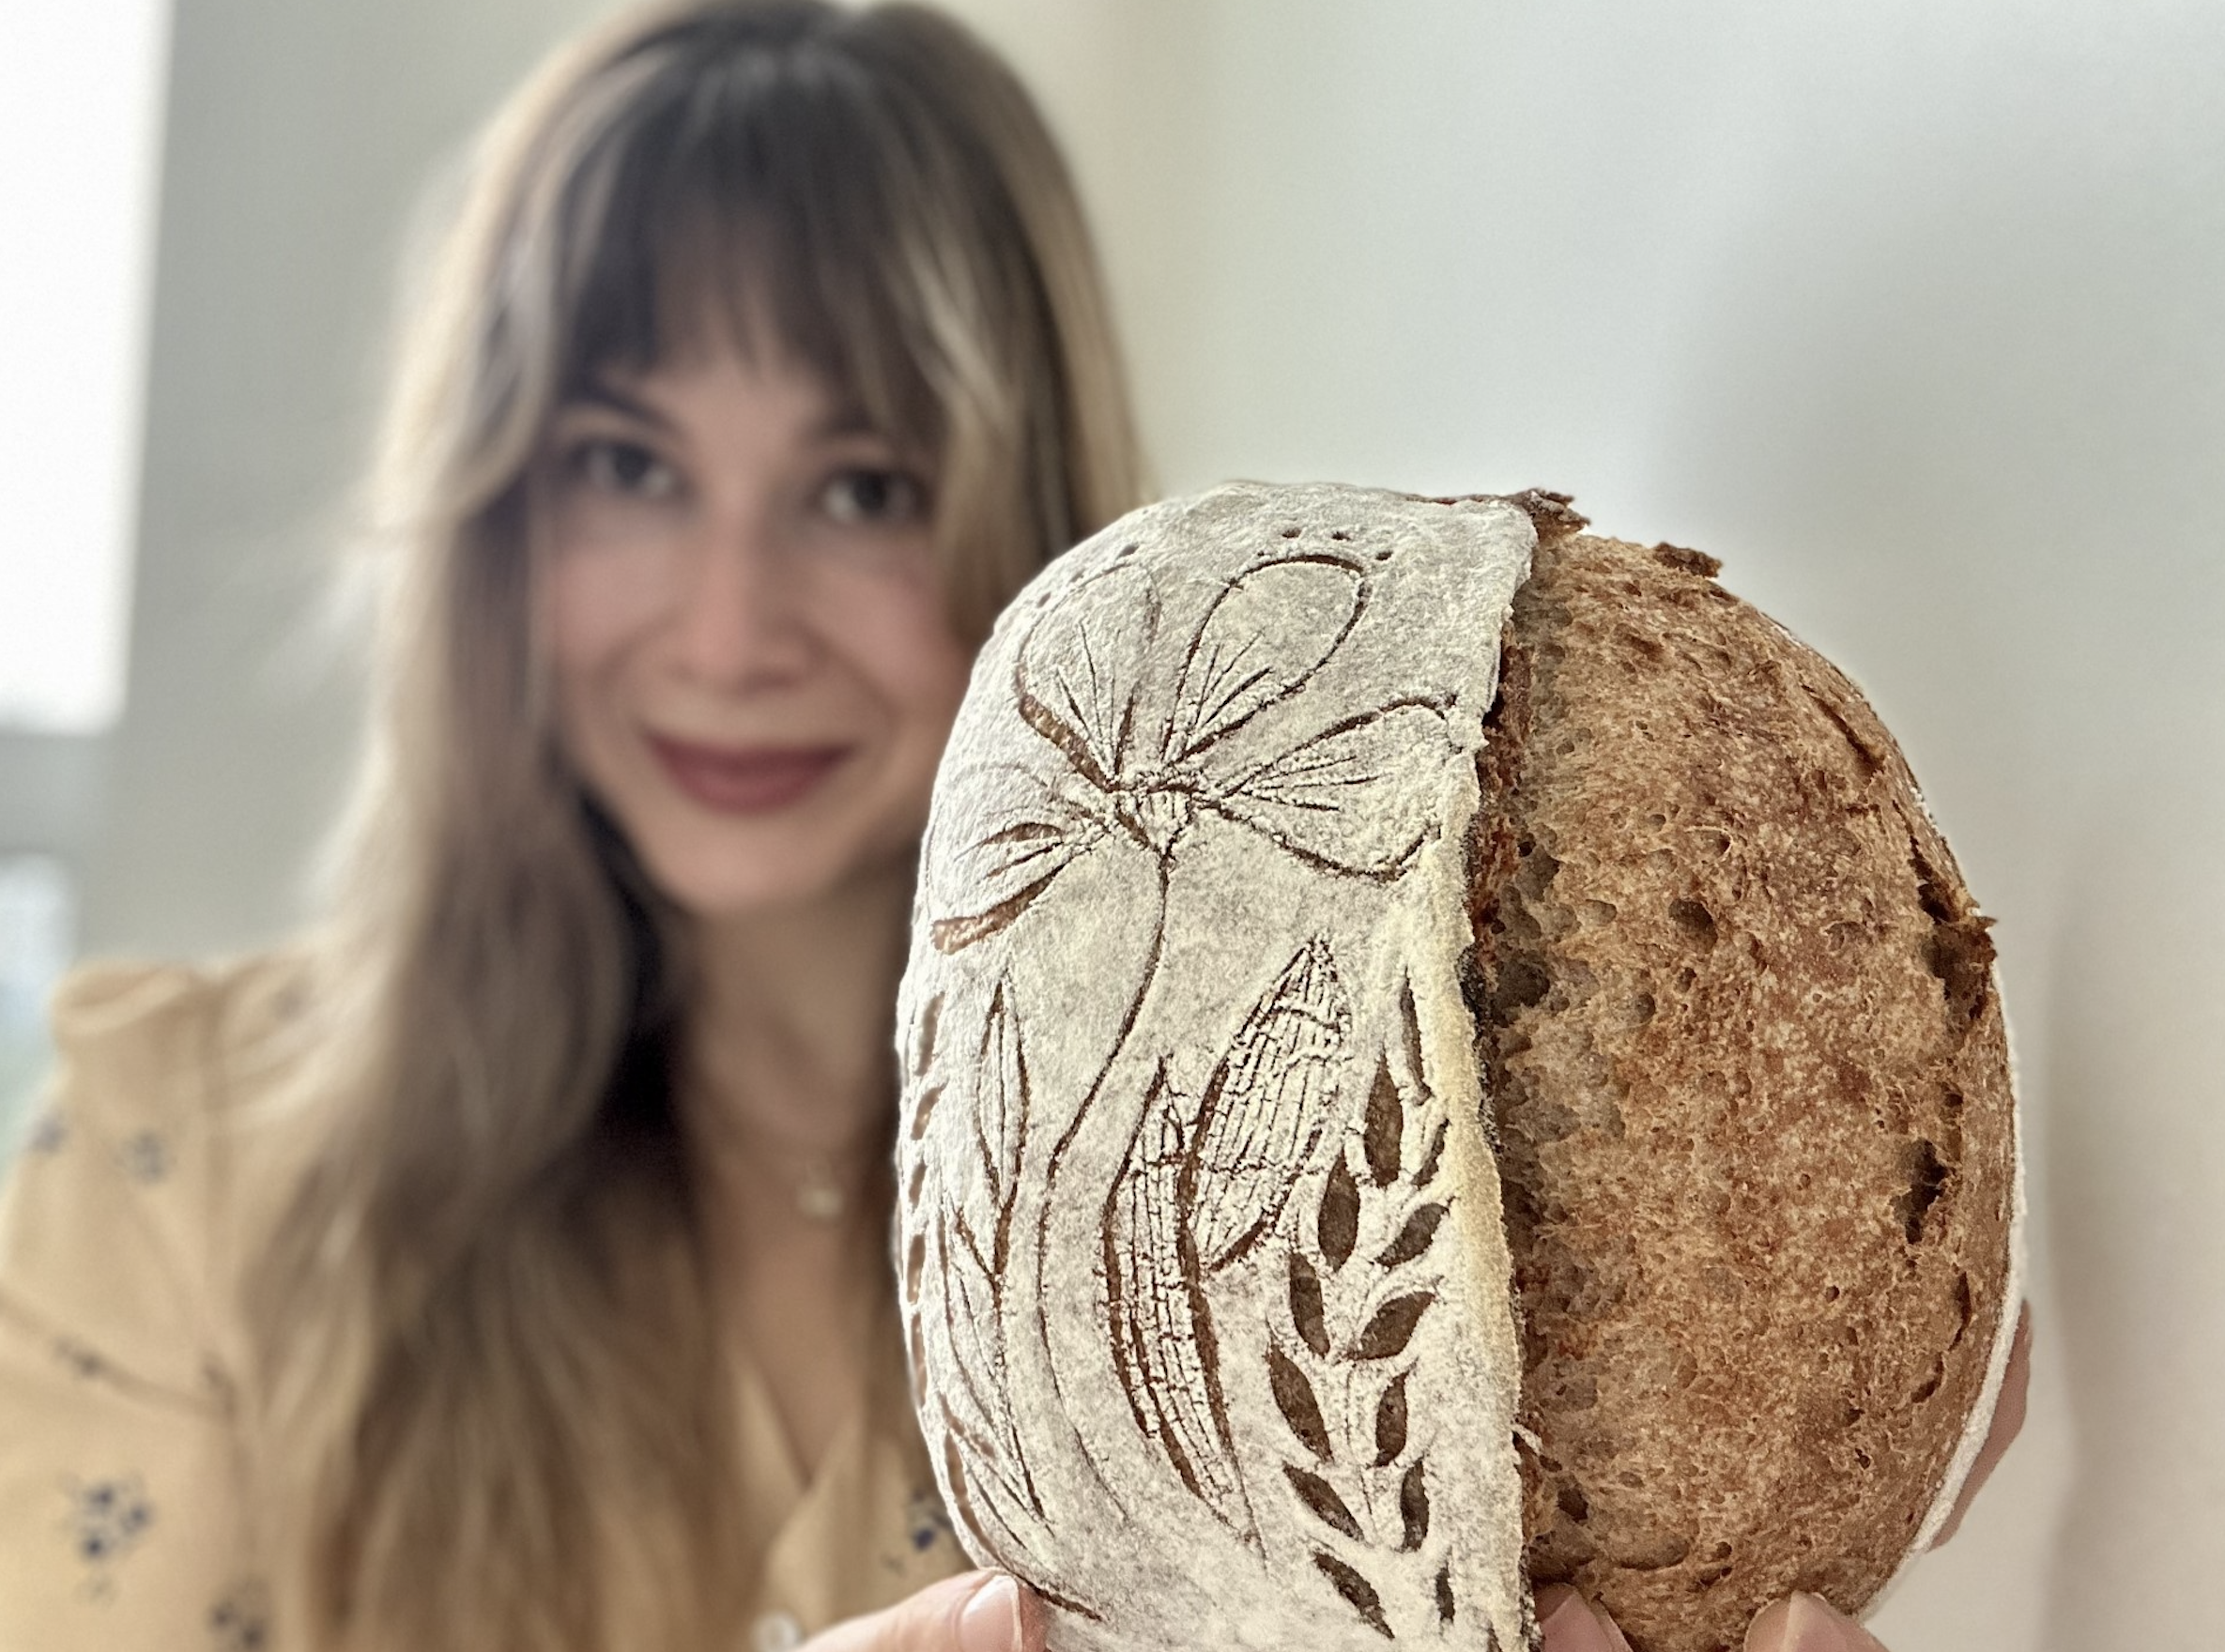 sourdough bread instagram social media influencer content creator on vancouver island in british columbia canada Jaimie from @TheSourdoughFlourist 2